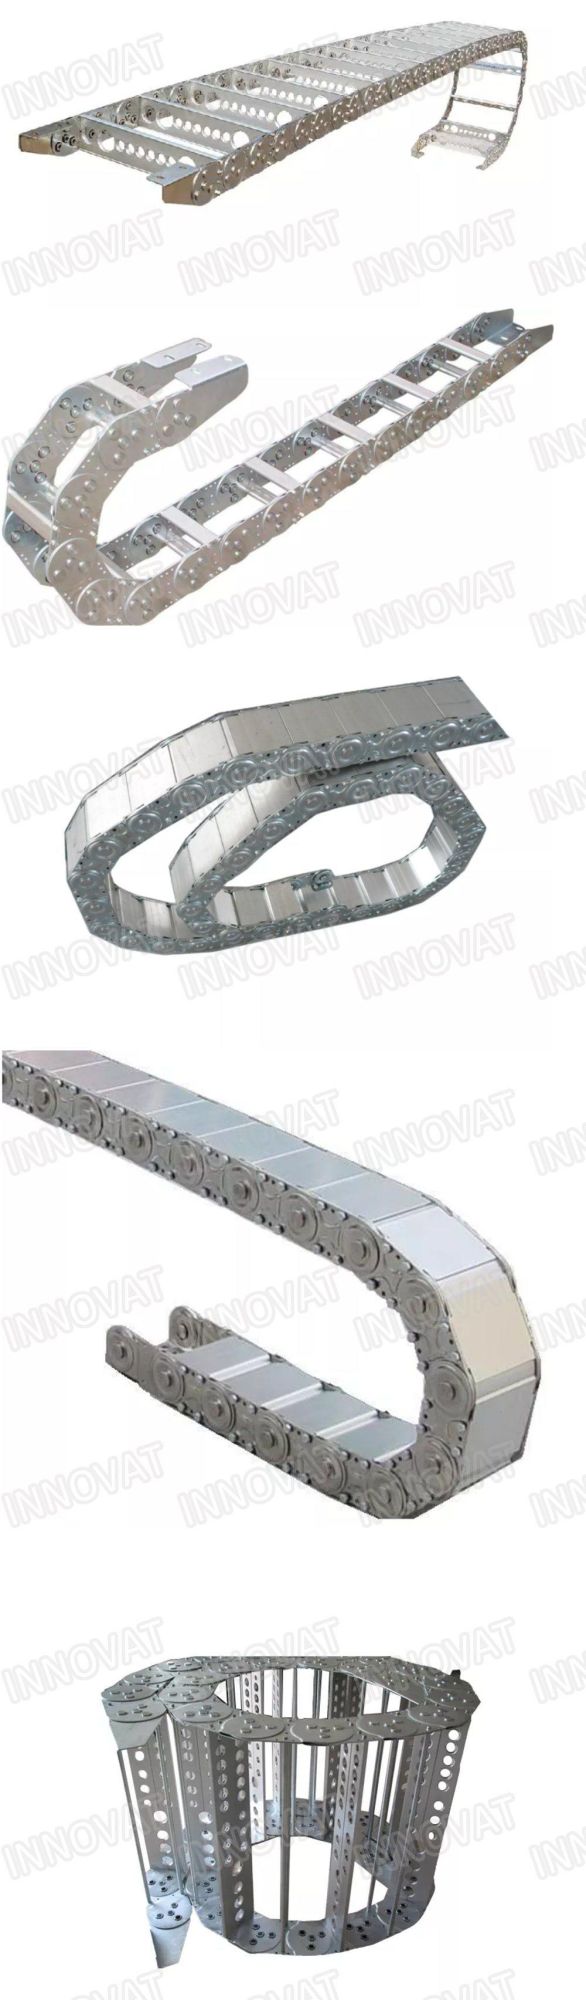 Heavy Duty Industrial Steel Cable Drag Chain Manufacturer Wholesale Stainless Steel Cable Drag Chain